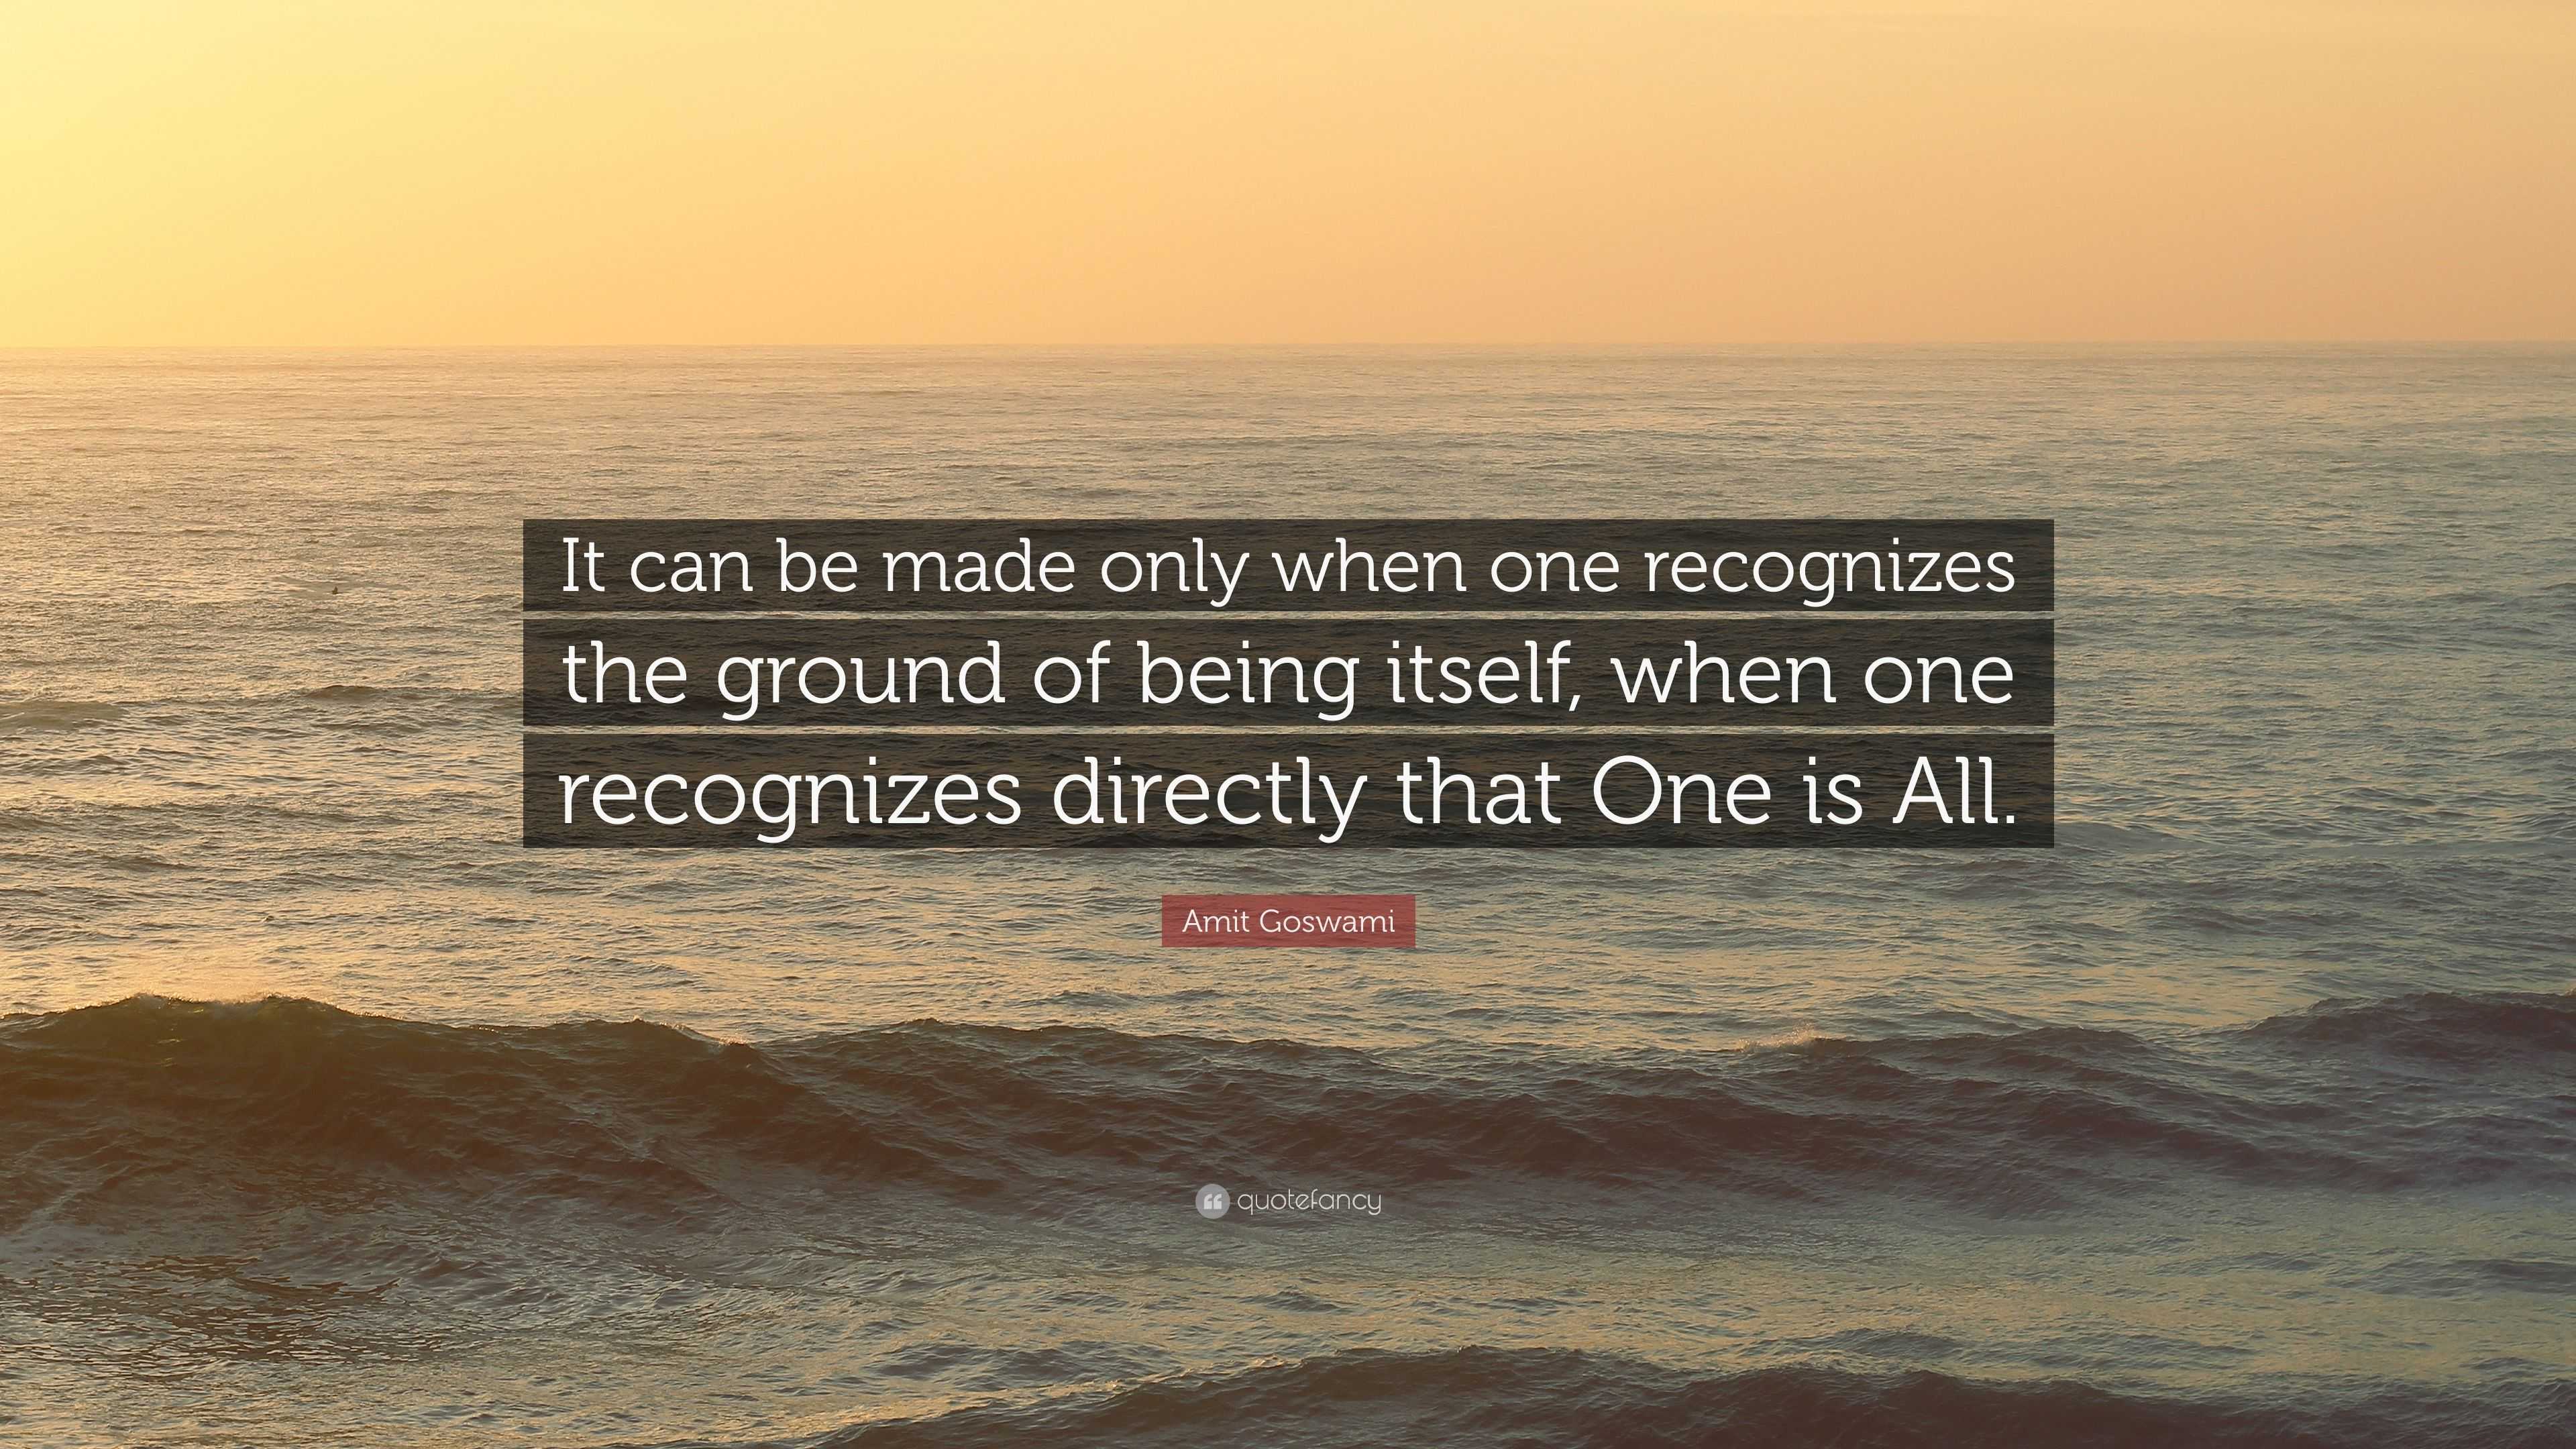 Amit Goswami Quote: “It can be made only when one recognizes the ground ...